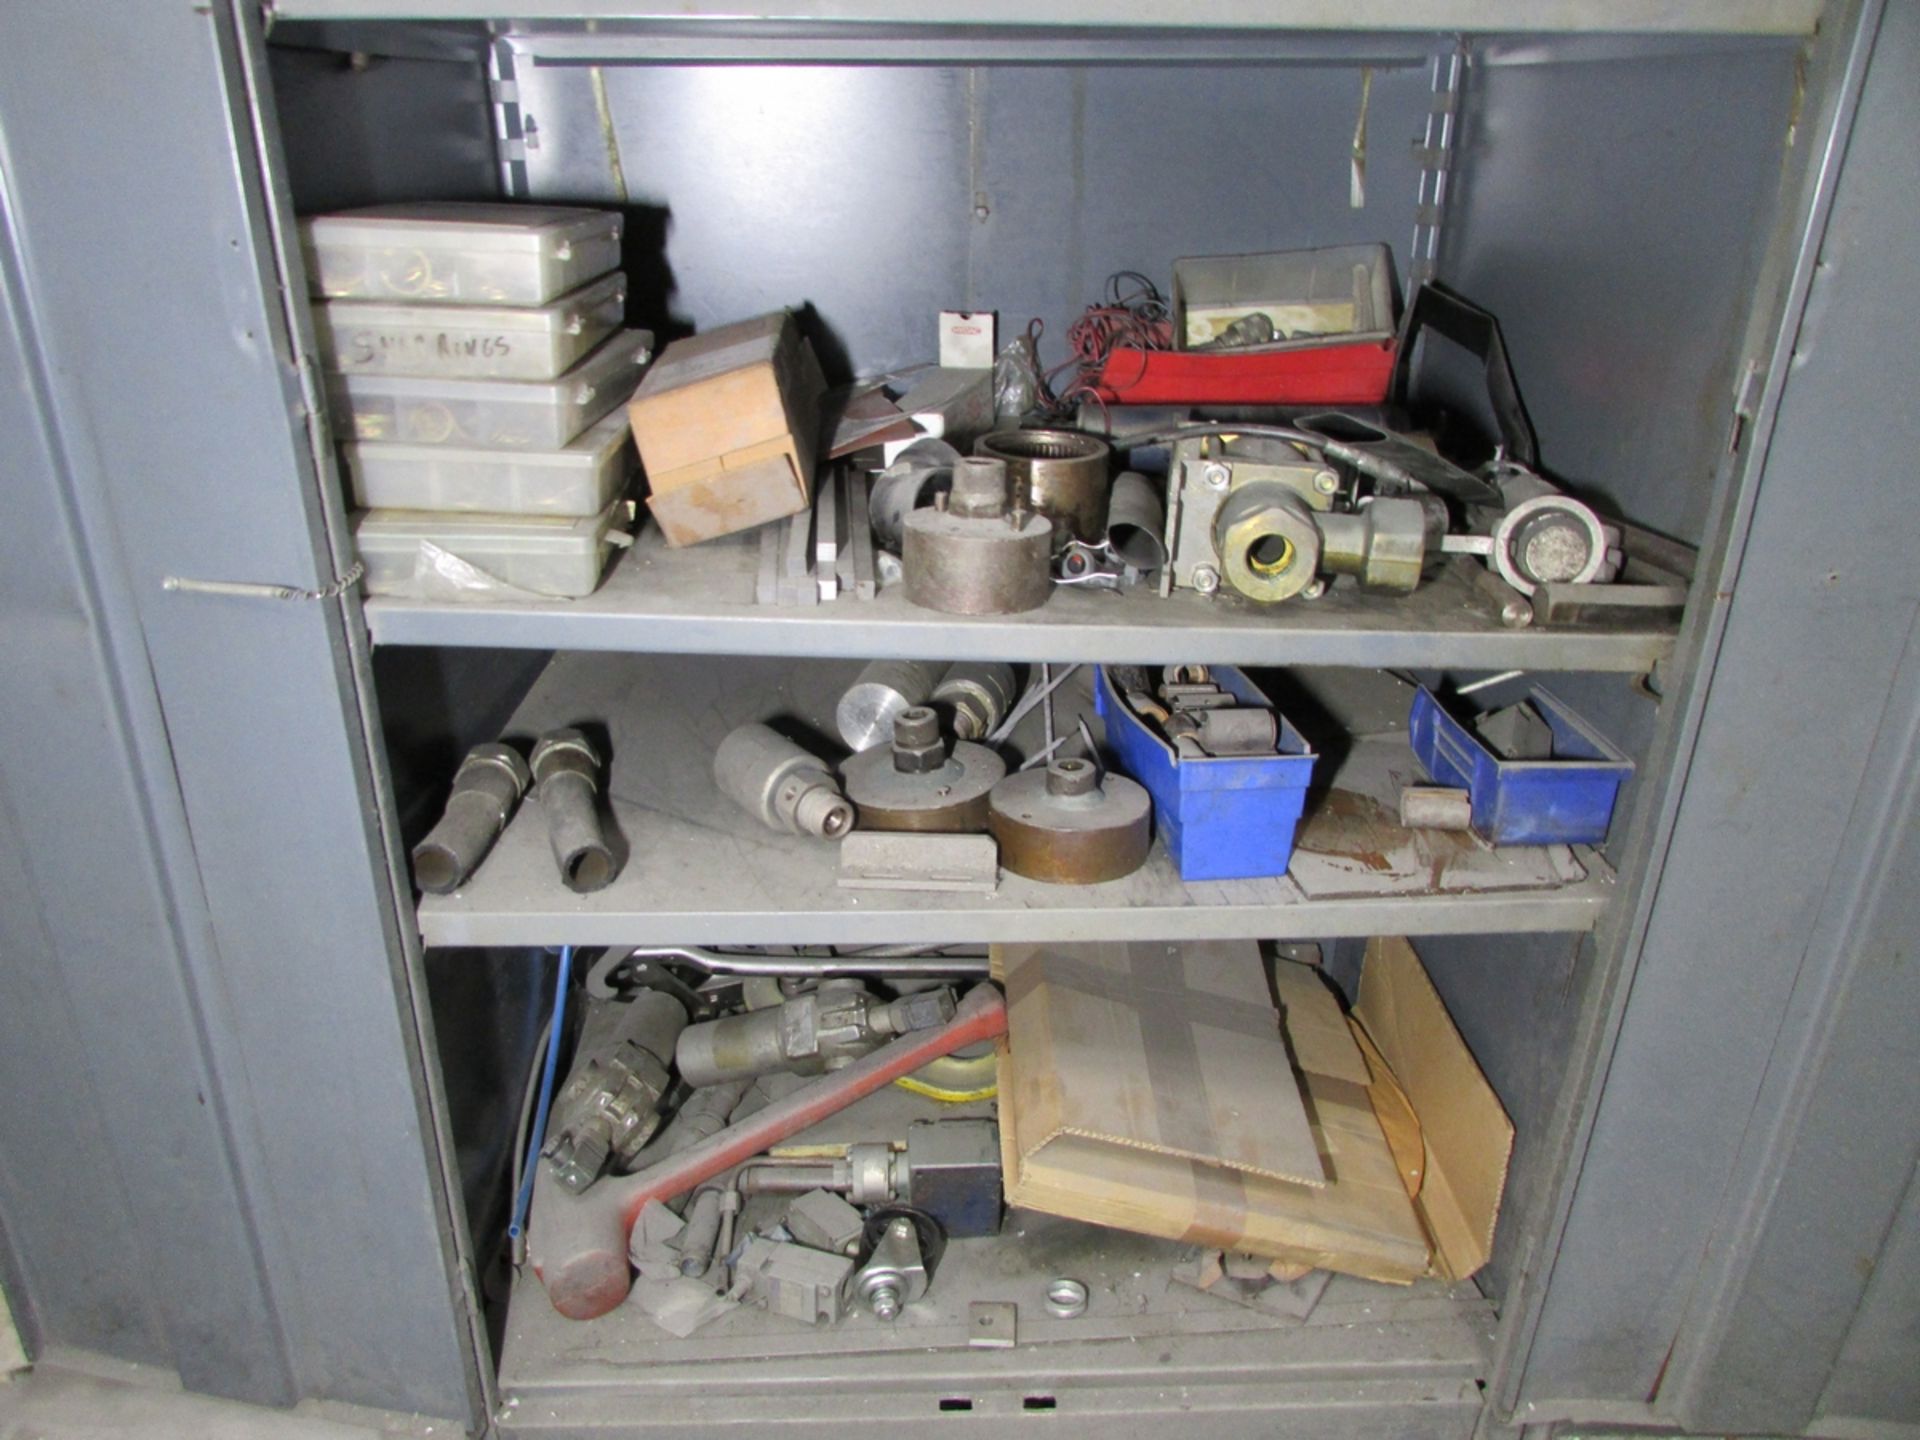 LOT - (3) 2-DOOR CABINETS, W/ CONTENTS: ASSORTED PARTS, FUSES, HARDWARE, ETC. - Image 7 of 10